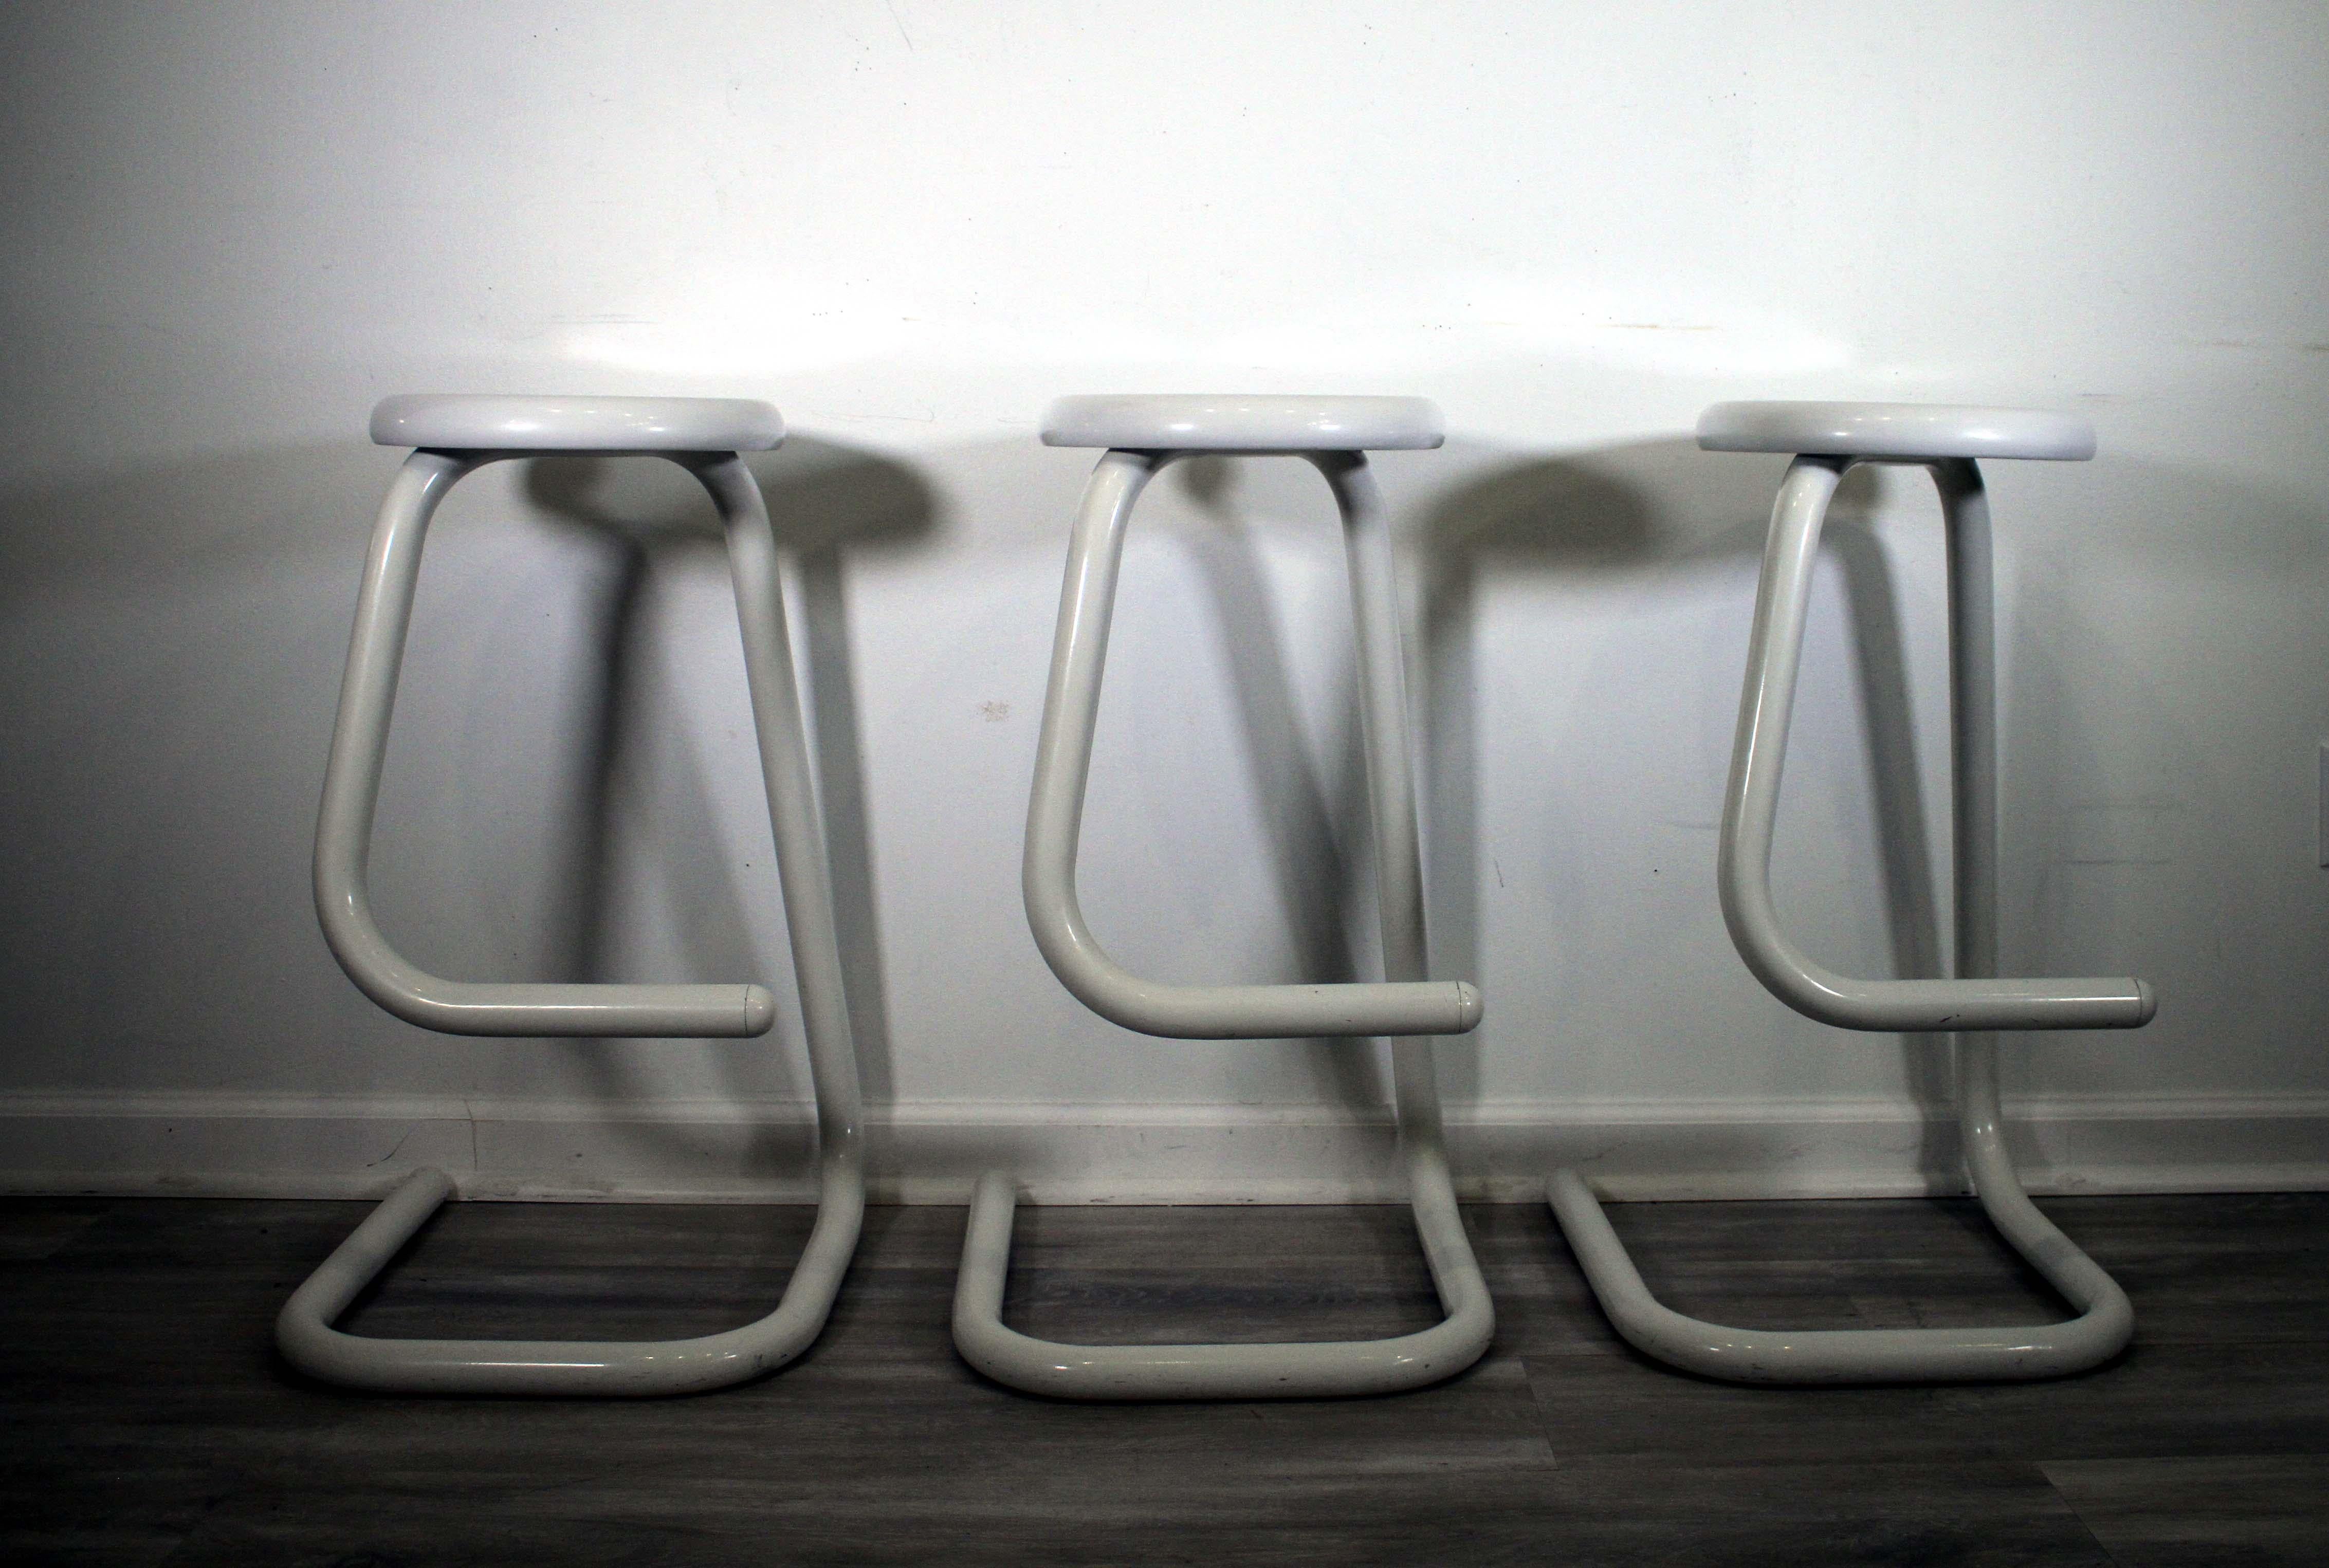 This set of 3 1970s Paperclip Stools by Kinetic is an iconic piece of Mid-Century Modern furniture. Crafted with a sleek, Minimalist design, each stool is constructed from sturdy metal rods and finished in a Classic white. The frame of each stool is